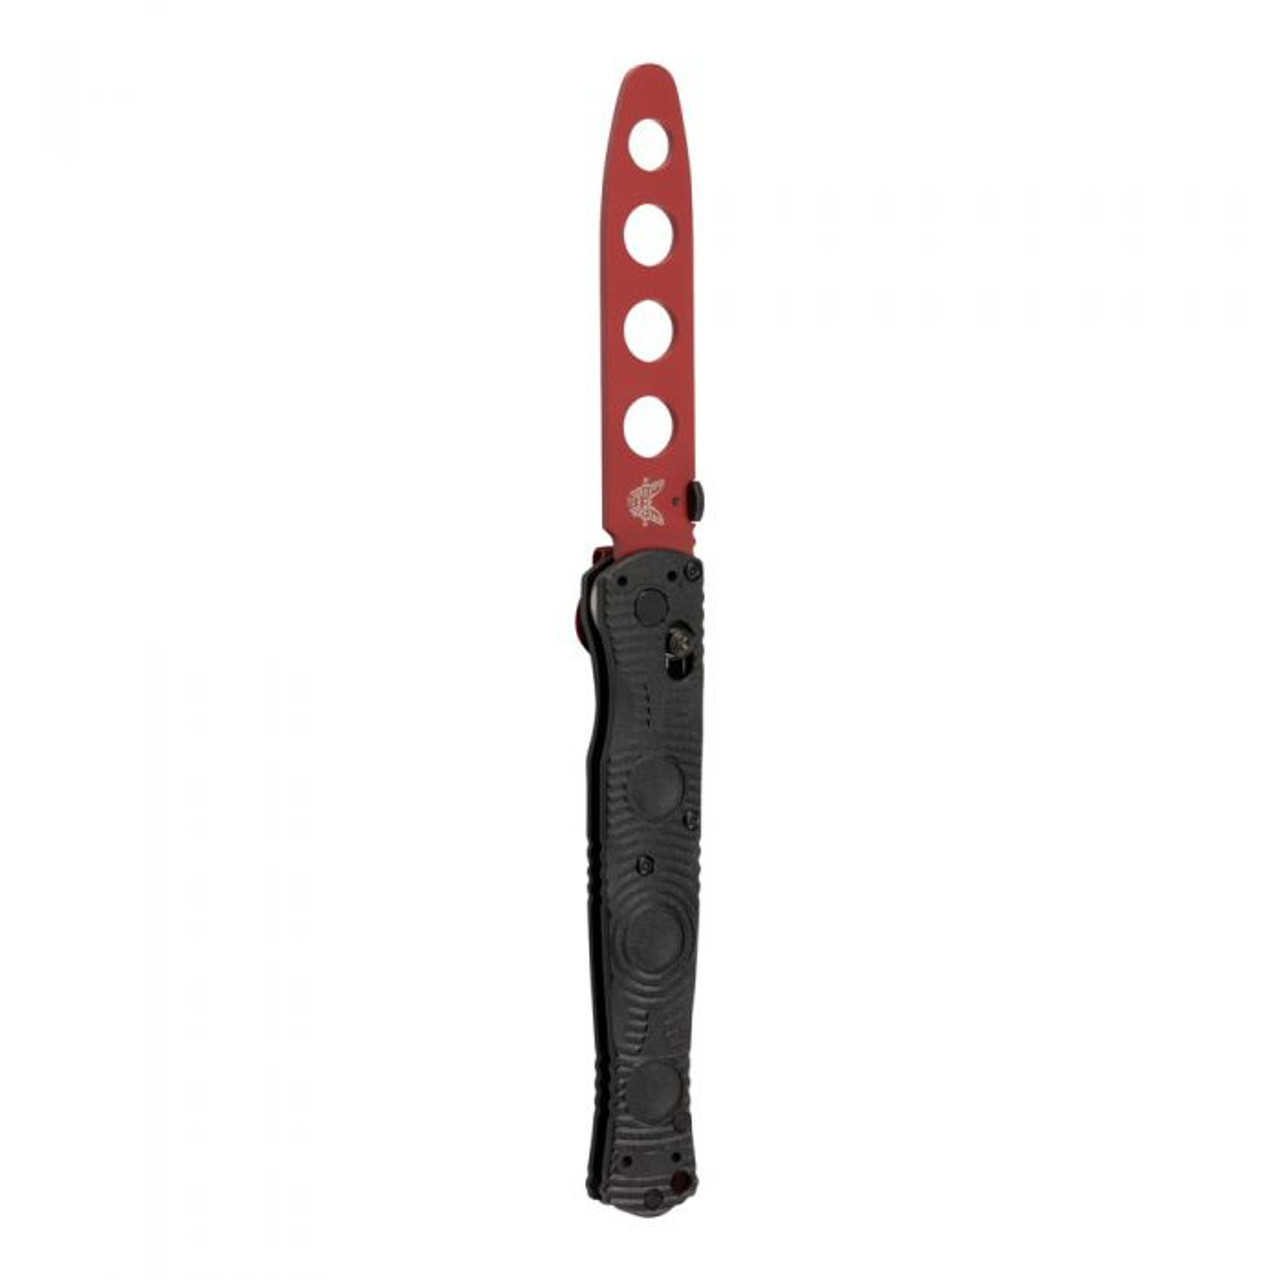 Benchmade 391T SOCP Tactical AXIS Trainer - 4.47 Non-Sharpened